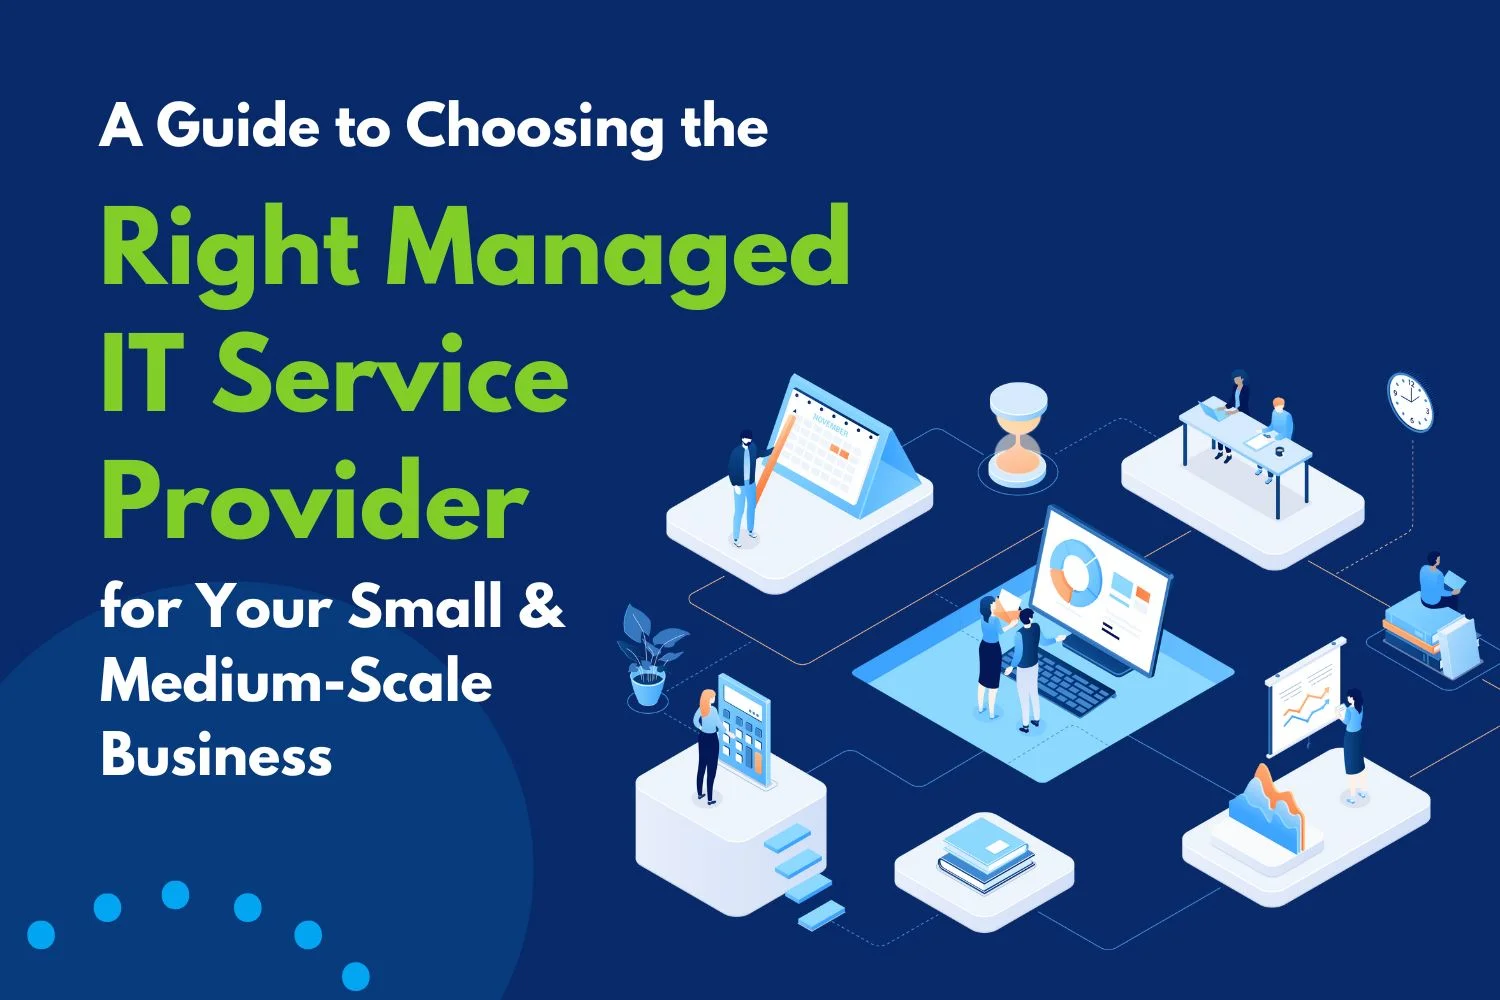 A Guide to Choosing the Right Managed IT Service Provider for Your Small & Medium-Scale Business